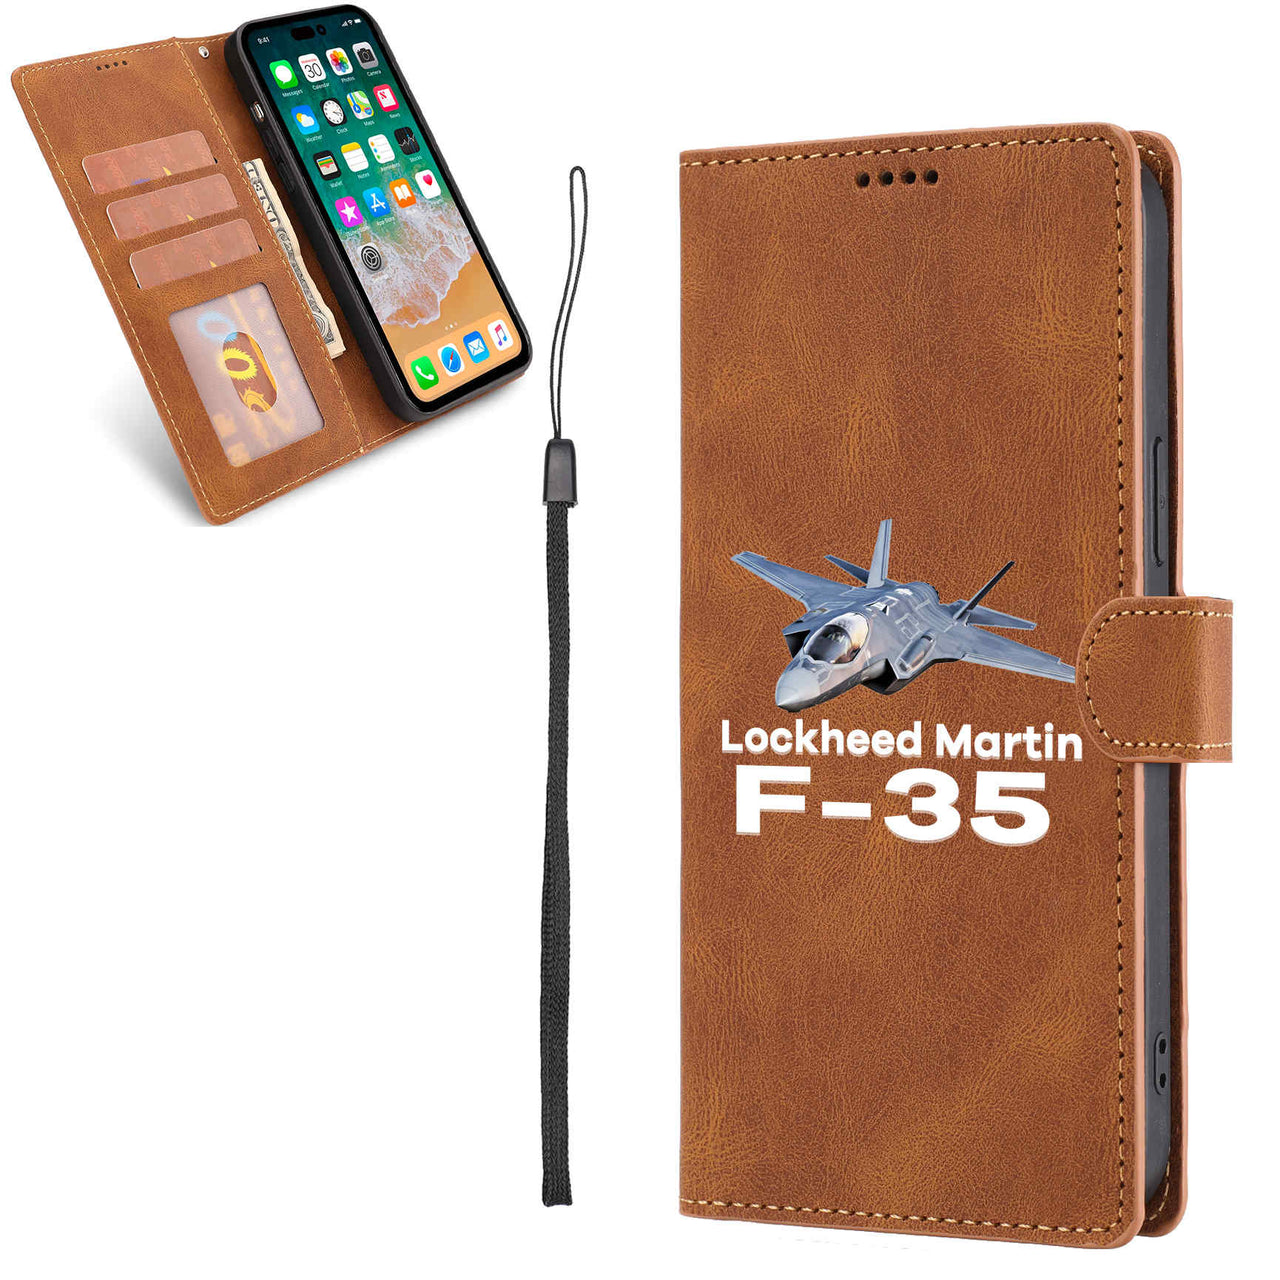 The Lockheed Martin F35 Designed Leather Samsung S & Note Cases